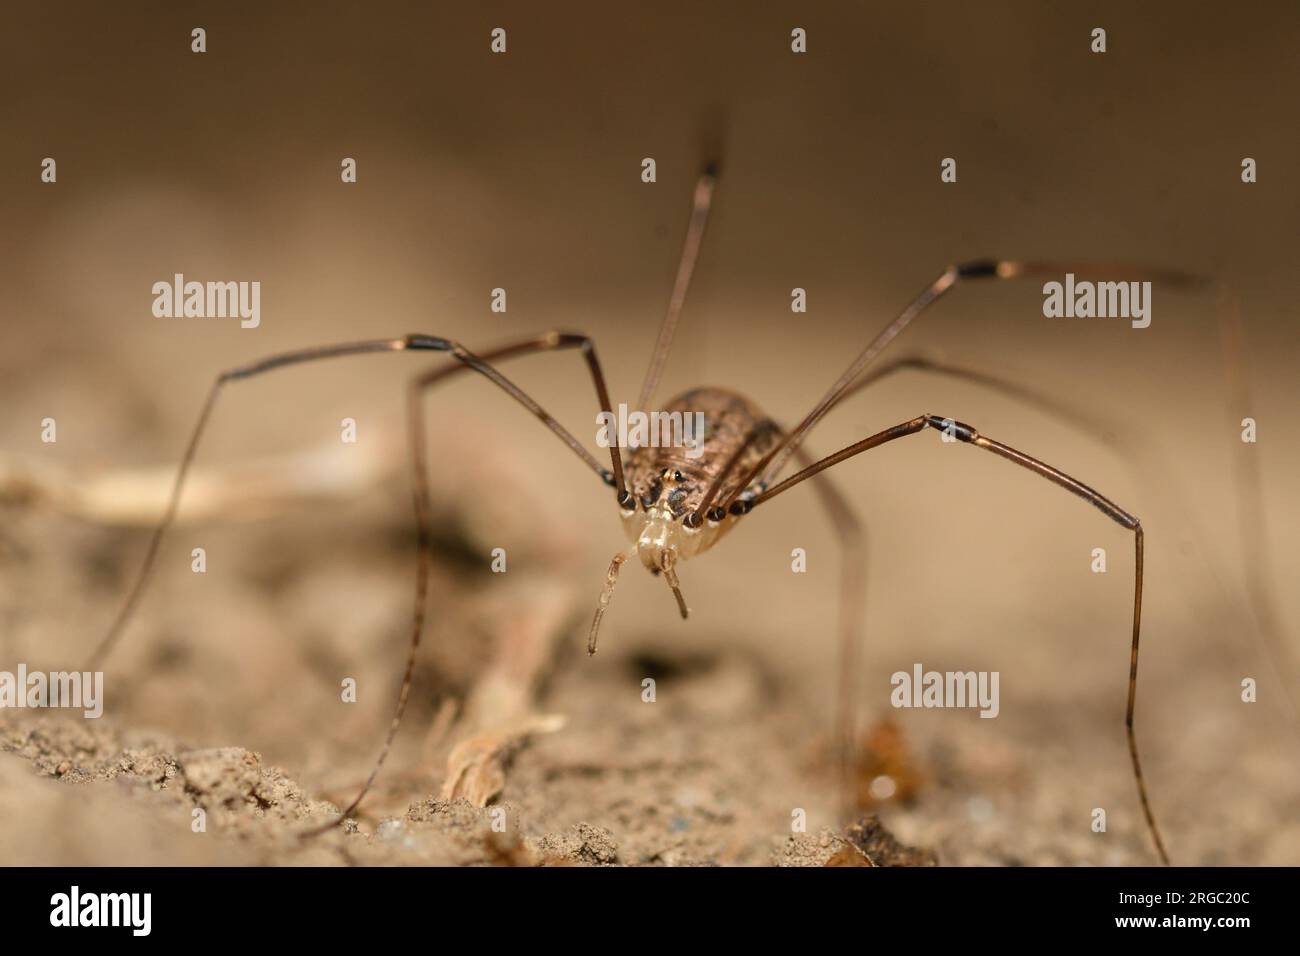 Close-up of a harvestman on the ground Stock Photo